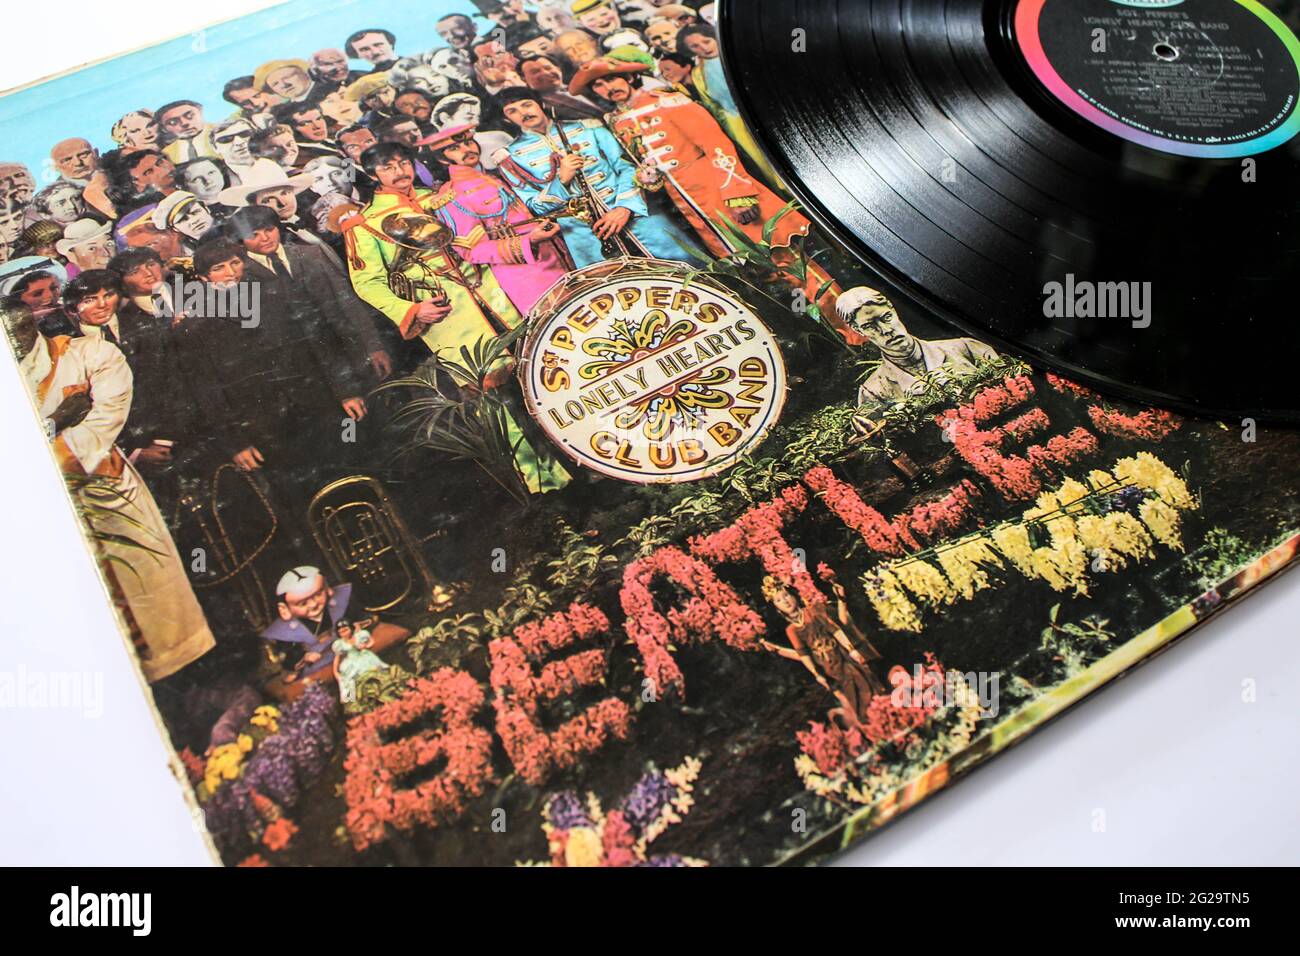 Sgt. Peppers Lonely Hearts Club Band is a record by the English rock band The Beatles. Music album is on a vinyl record LP disc. Psychedelic pop Stock Photo